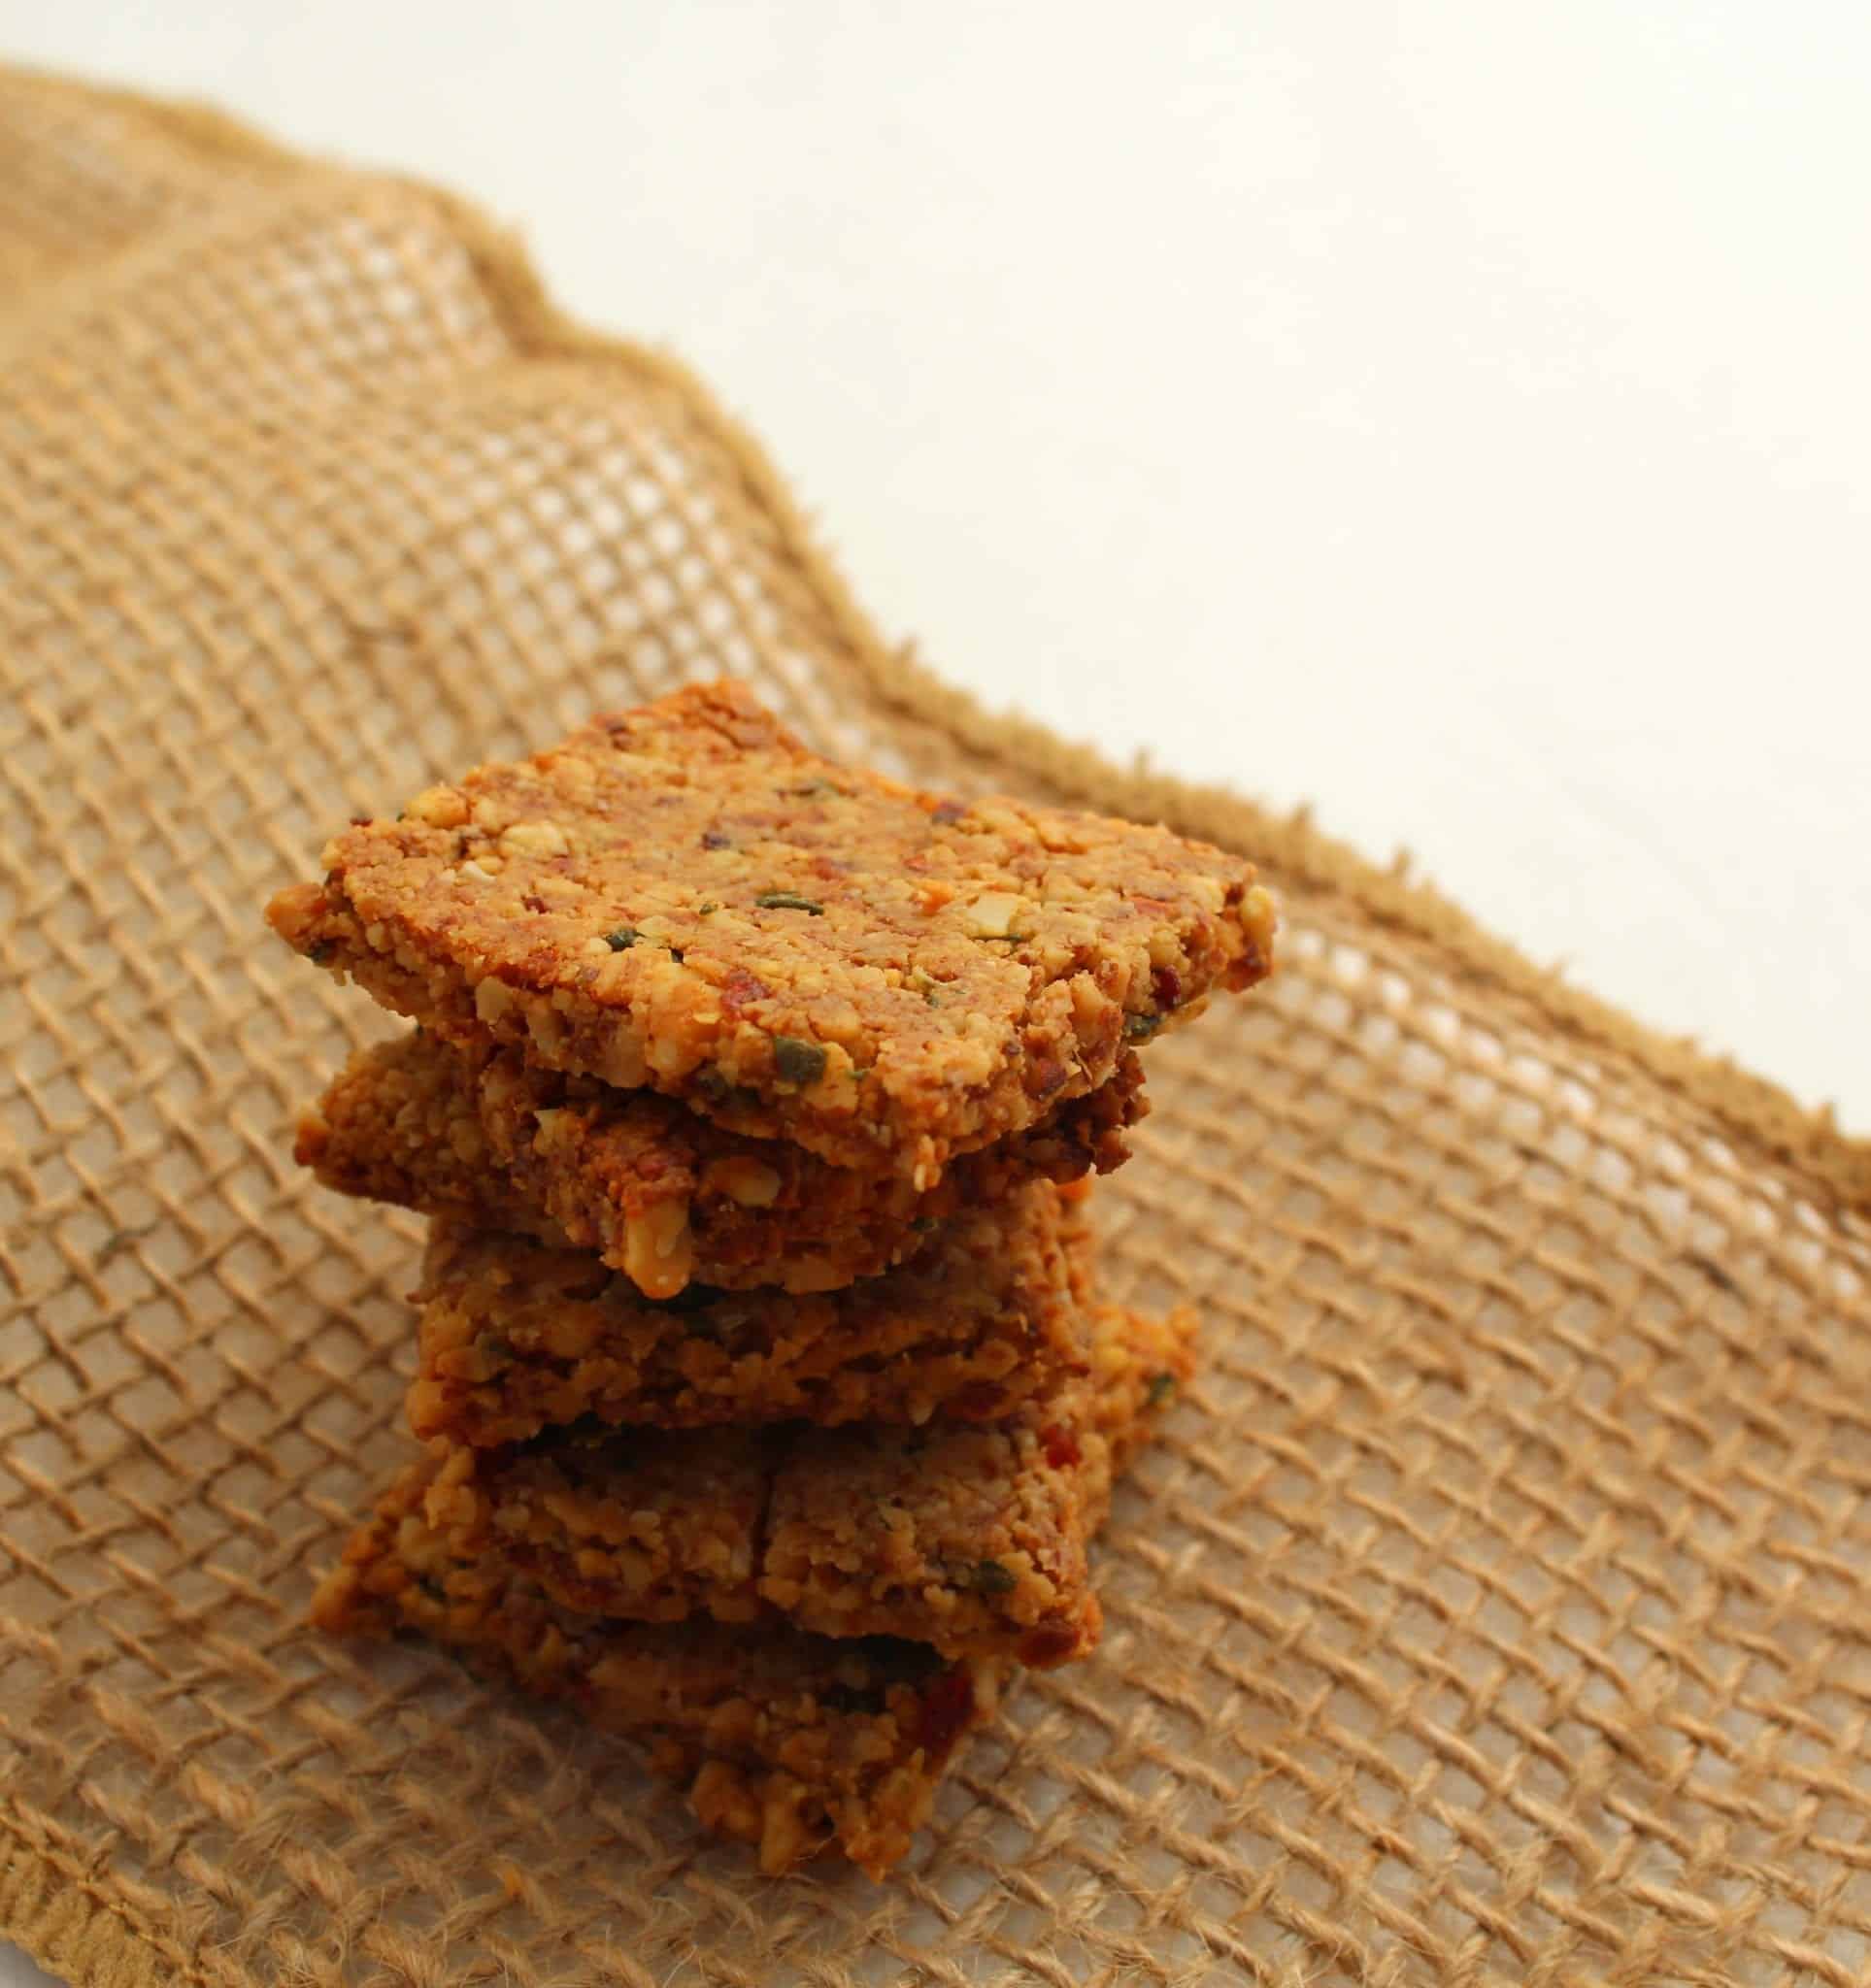 Cranberry Rosemary Almond Crackers from Treble in the Kitchen grain free, gluten free, paleo, whole 30, vegan